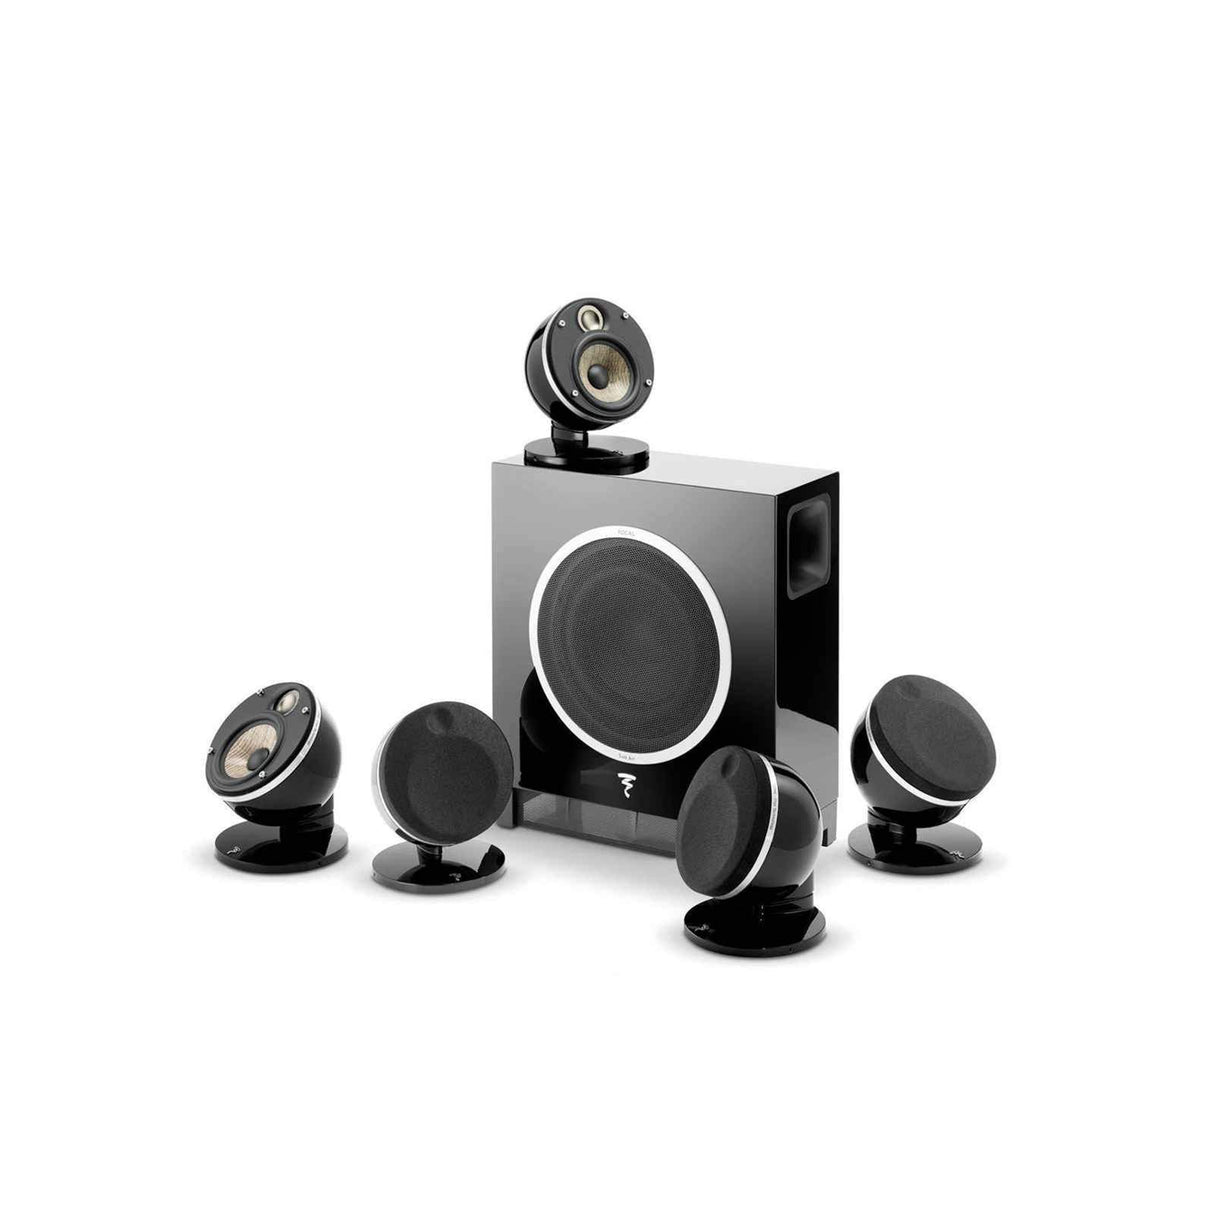 Focal Dome Flax Pack 5.1 Speaker Package with 5 Dome Flax satellites and Sub Air wireless powered subwoofer (Black/ White)